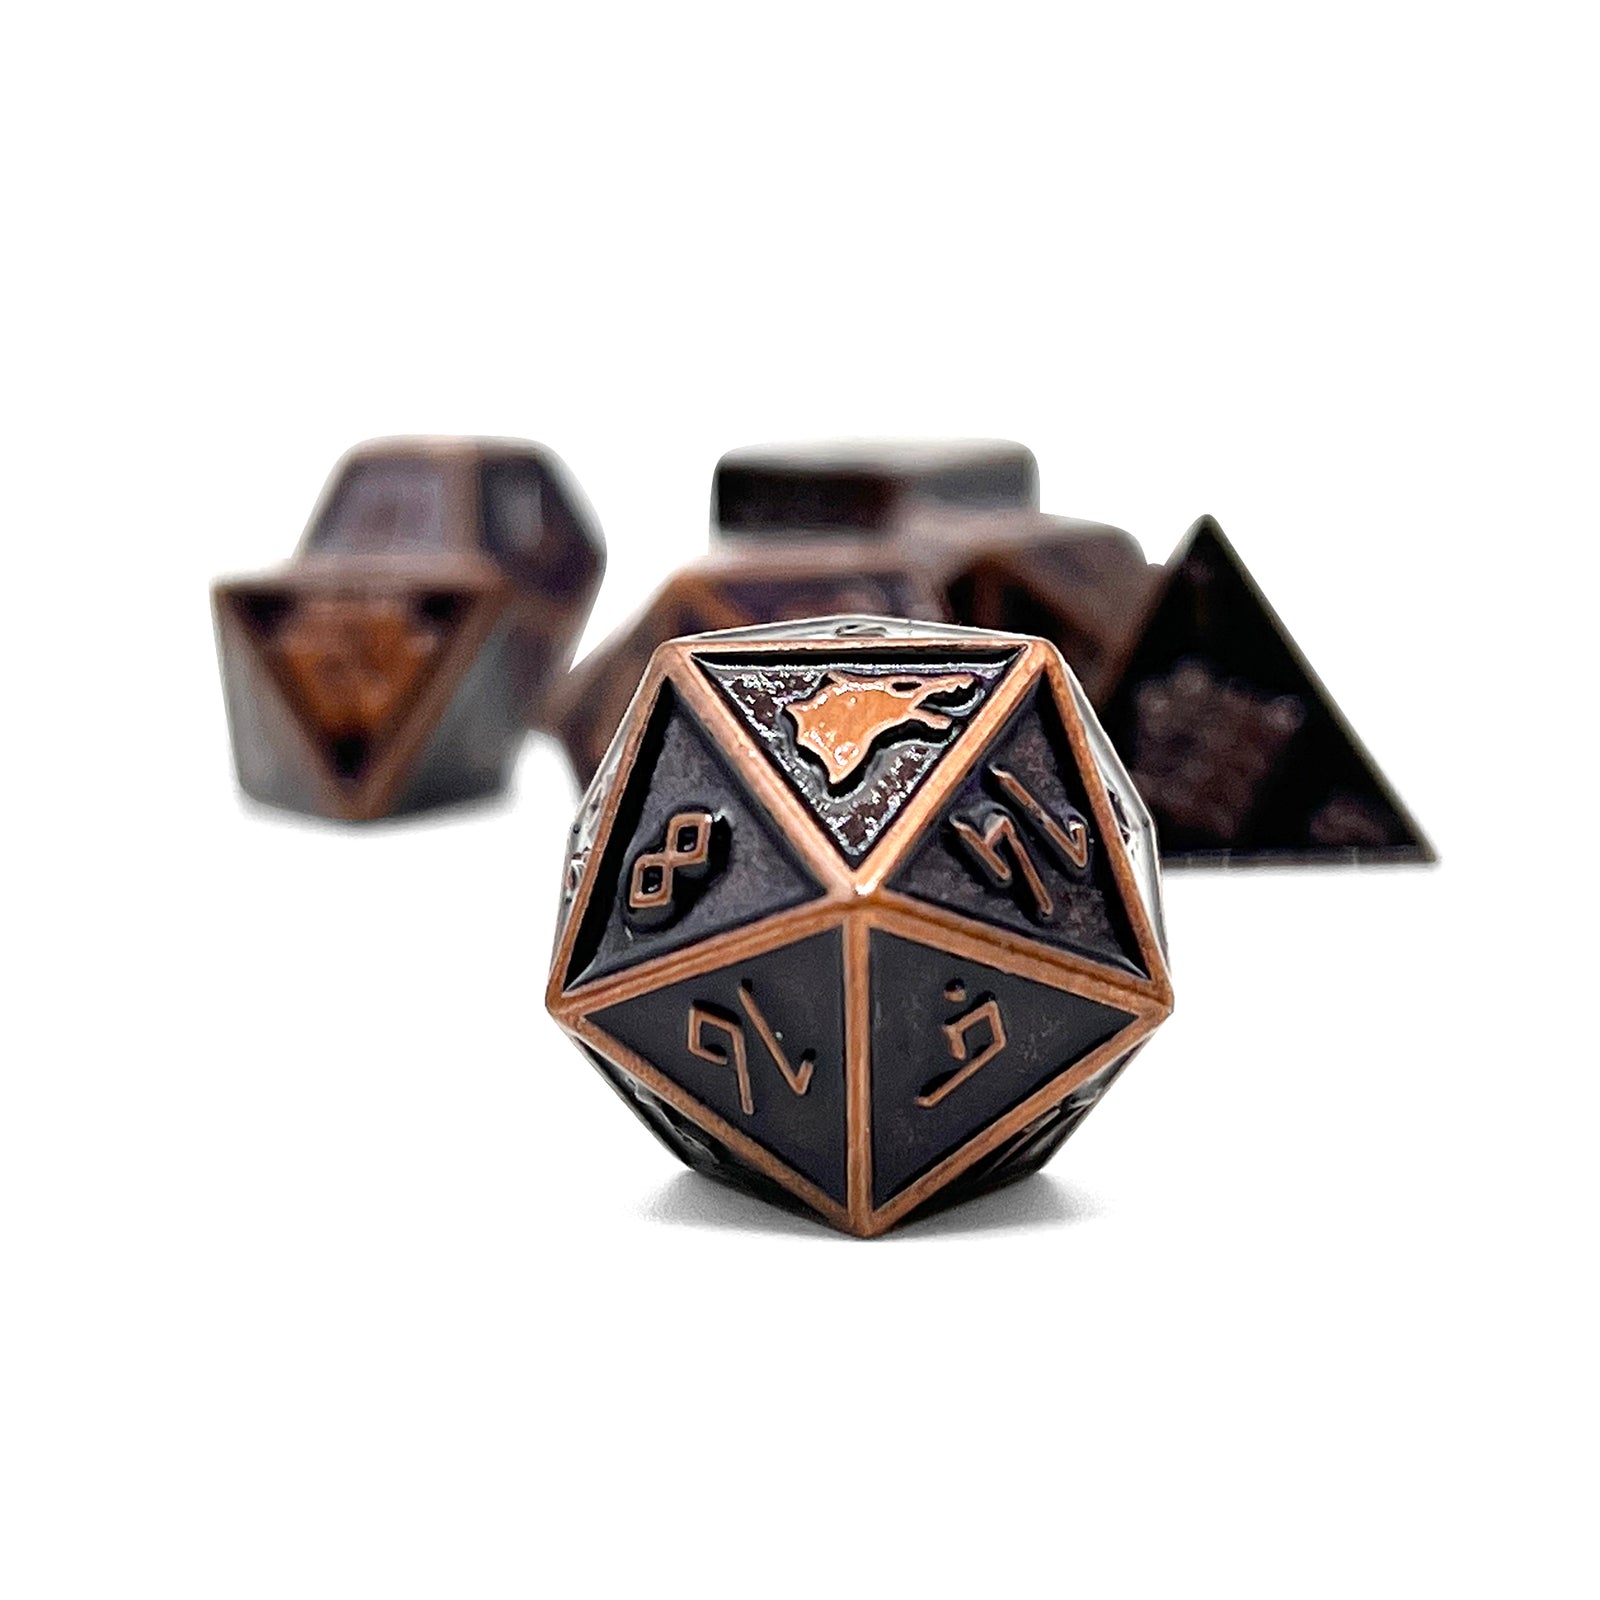 Rust Monster - Norse Themed Metal Dice Set